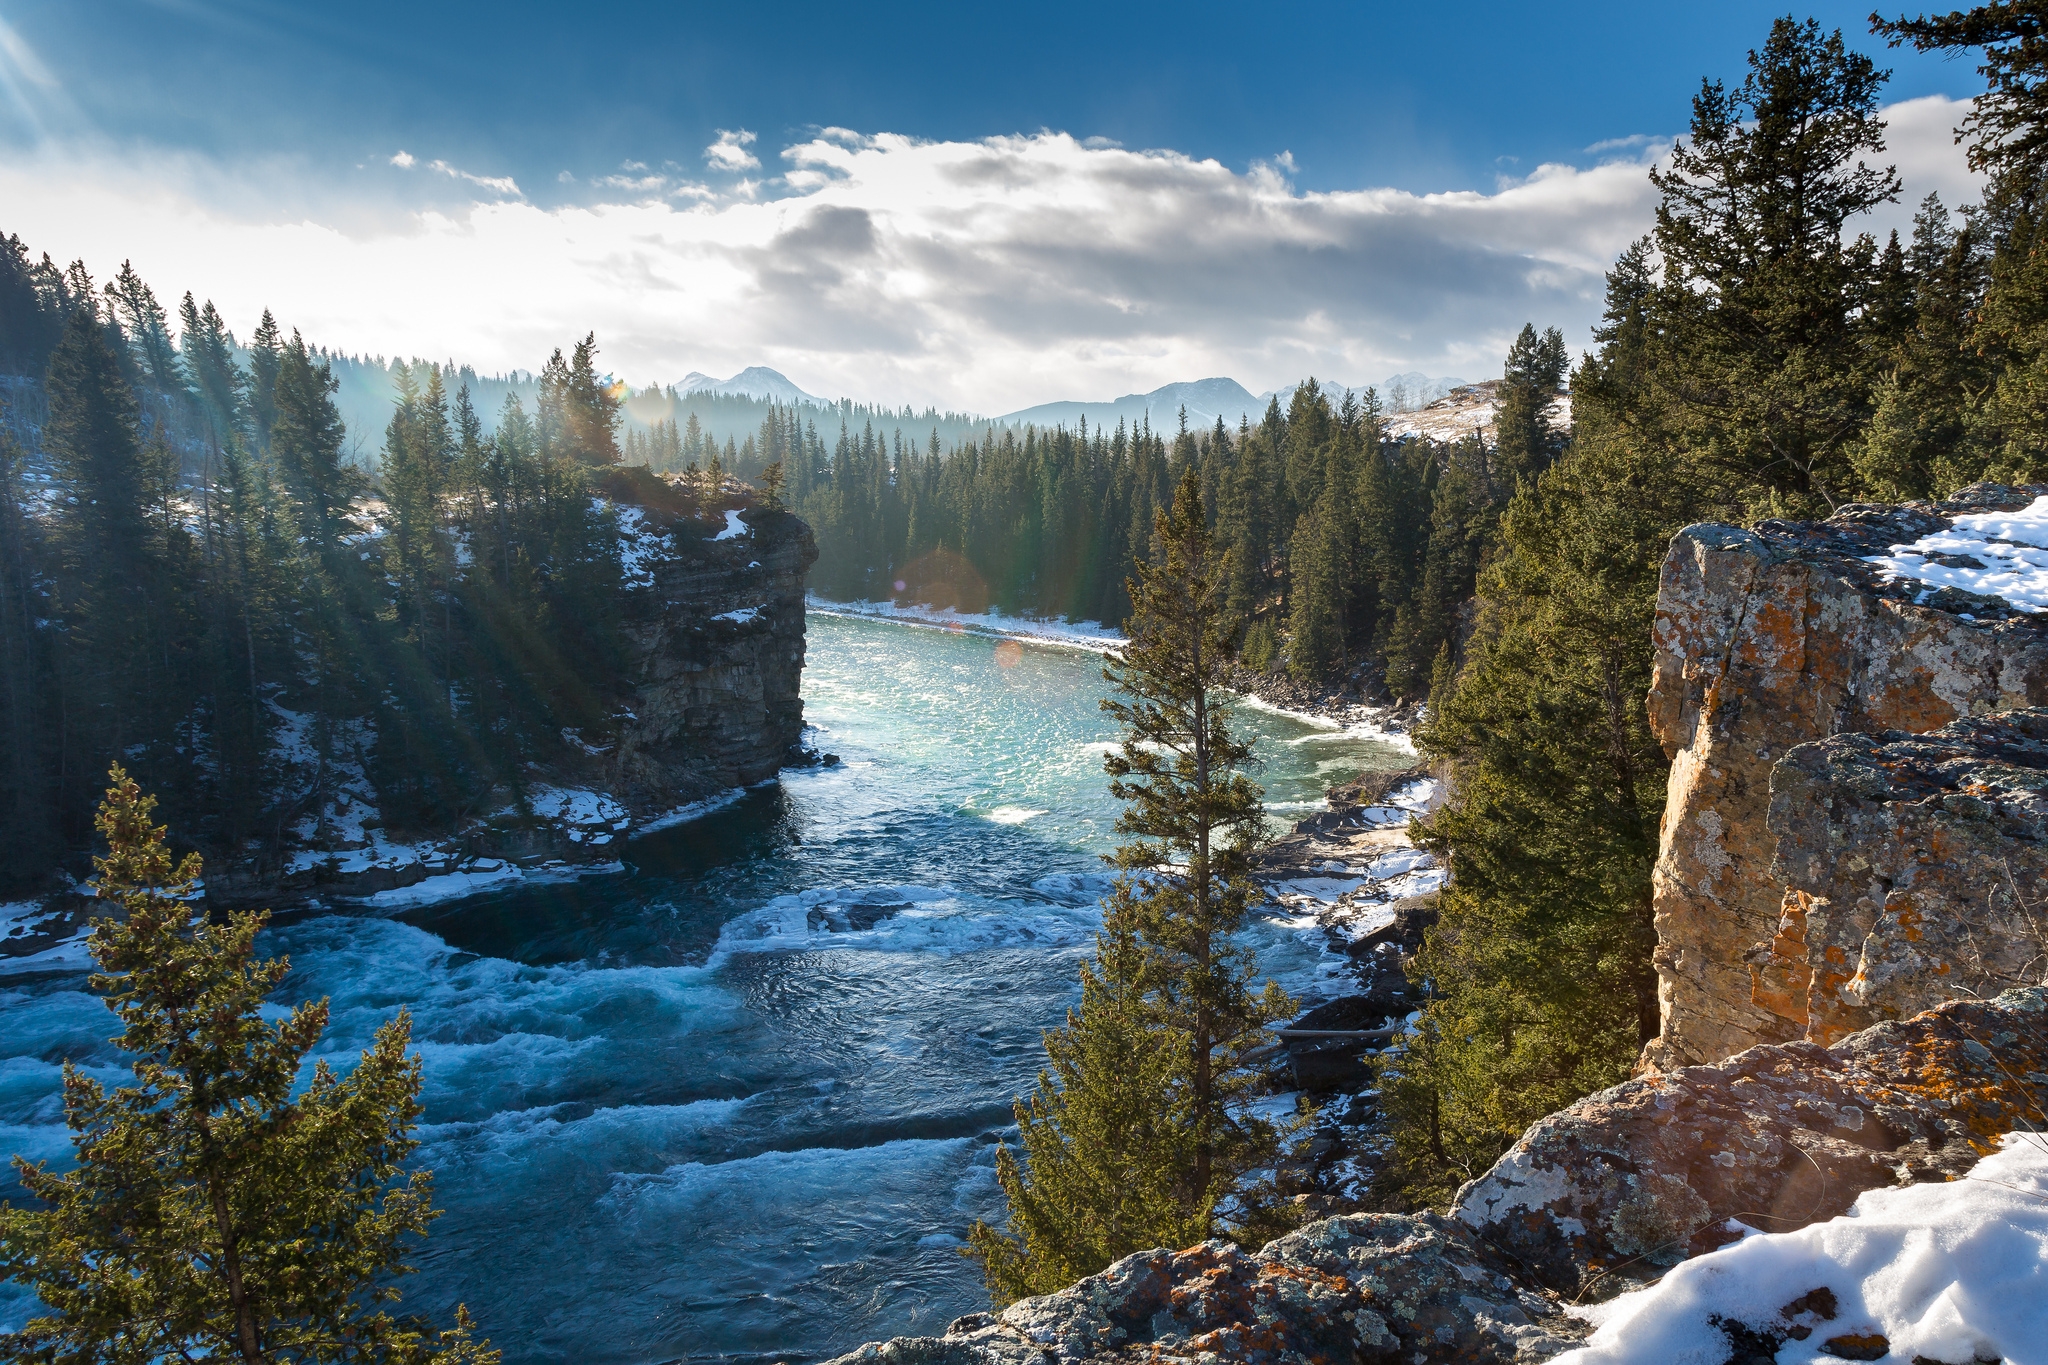 rocks, nature, mountains, canada, winter, trees, bow river, albert, alberta High Definition image